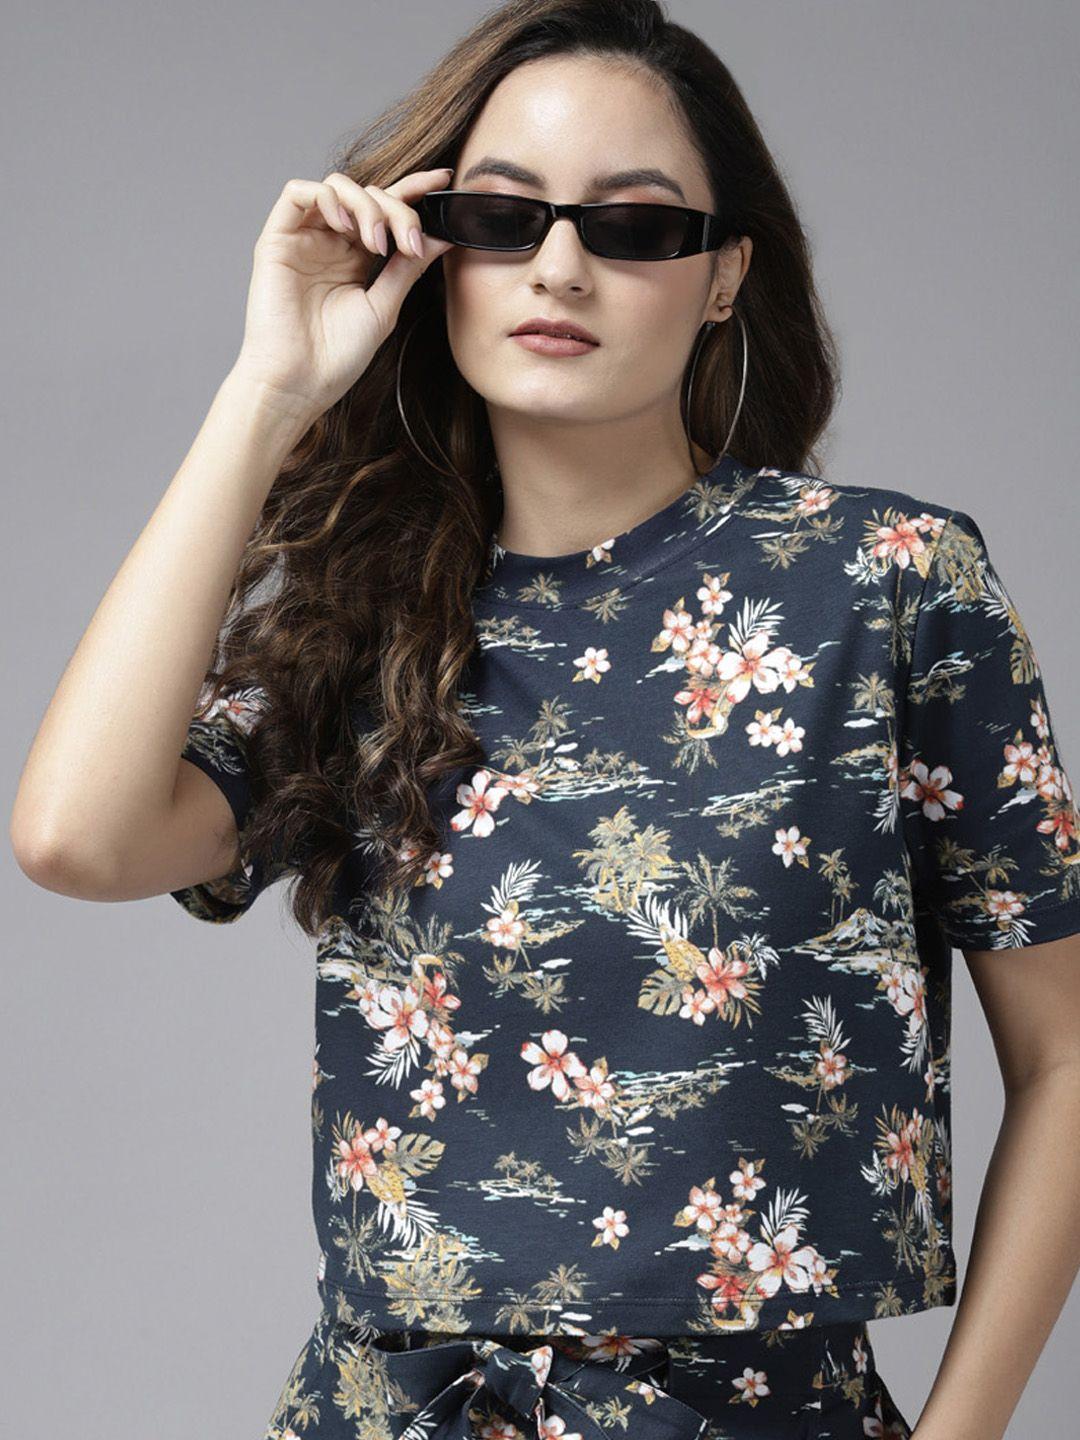 kassually women navy blue & white floral print boxy crop top